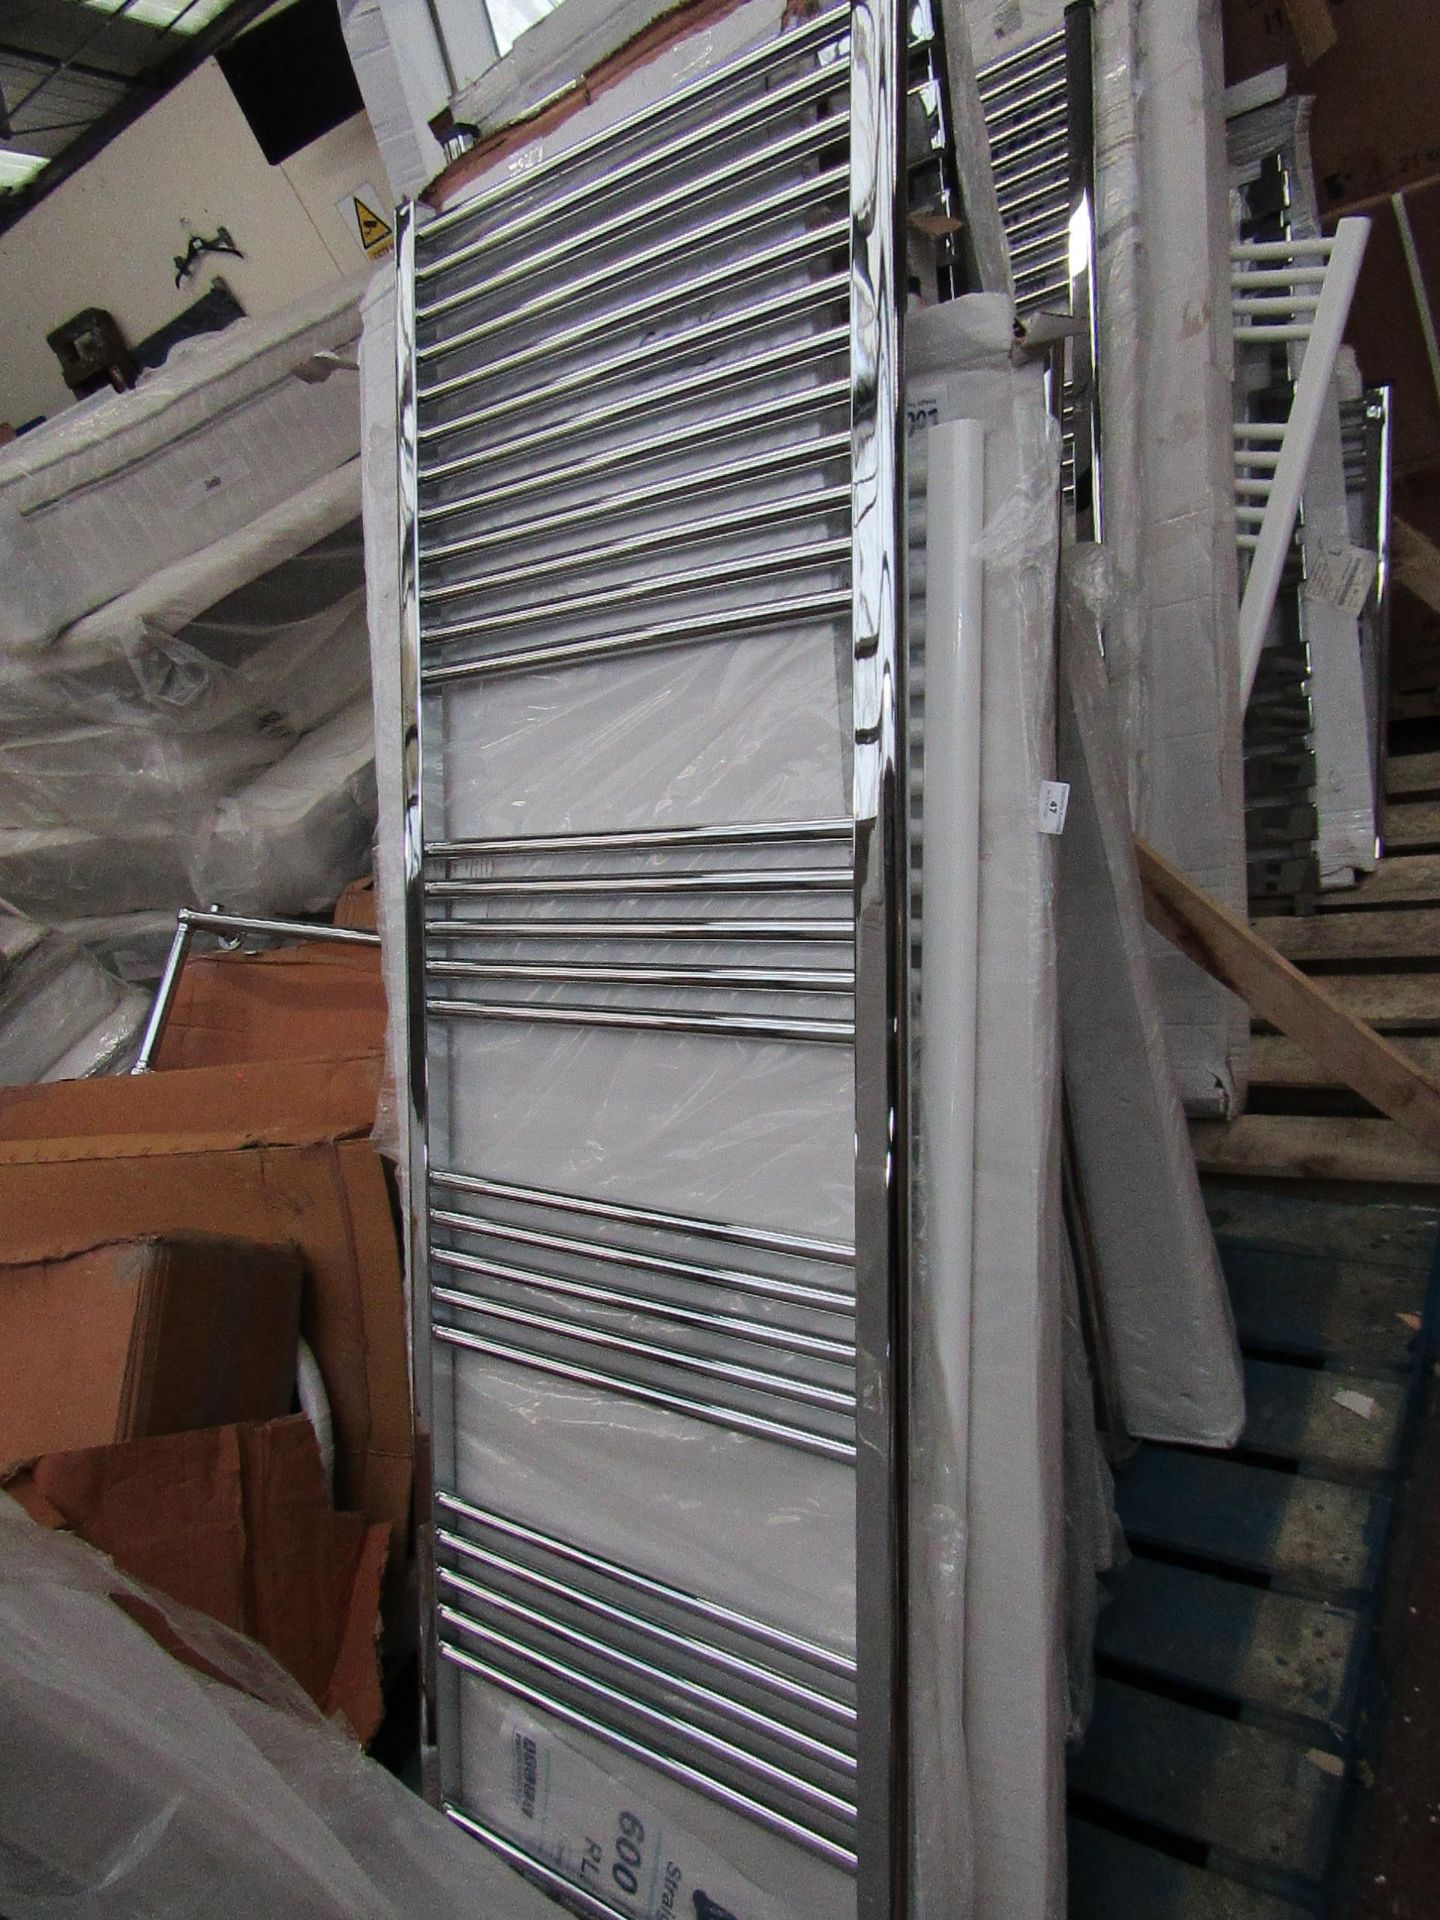 Loco straight towel radiator 600 x 1600, ex-display and boxed. Please note, this lot may contain